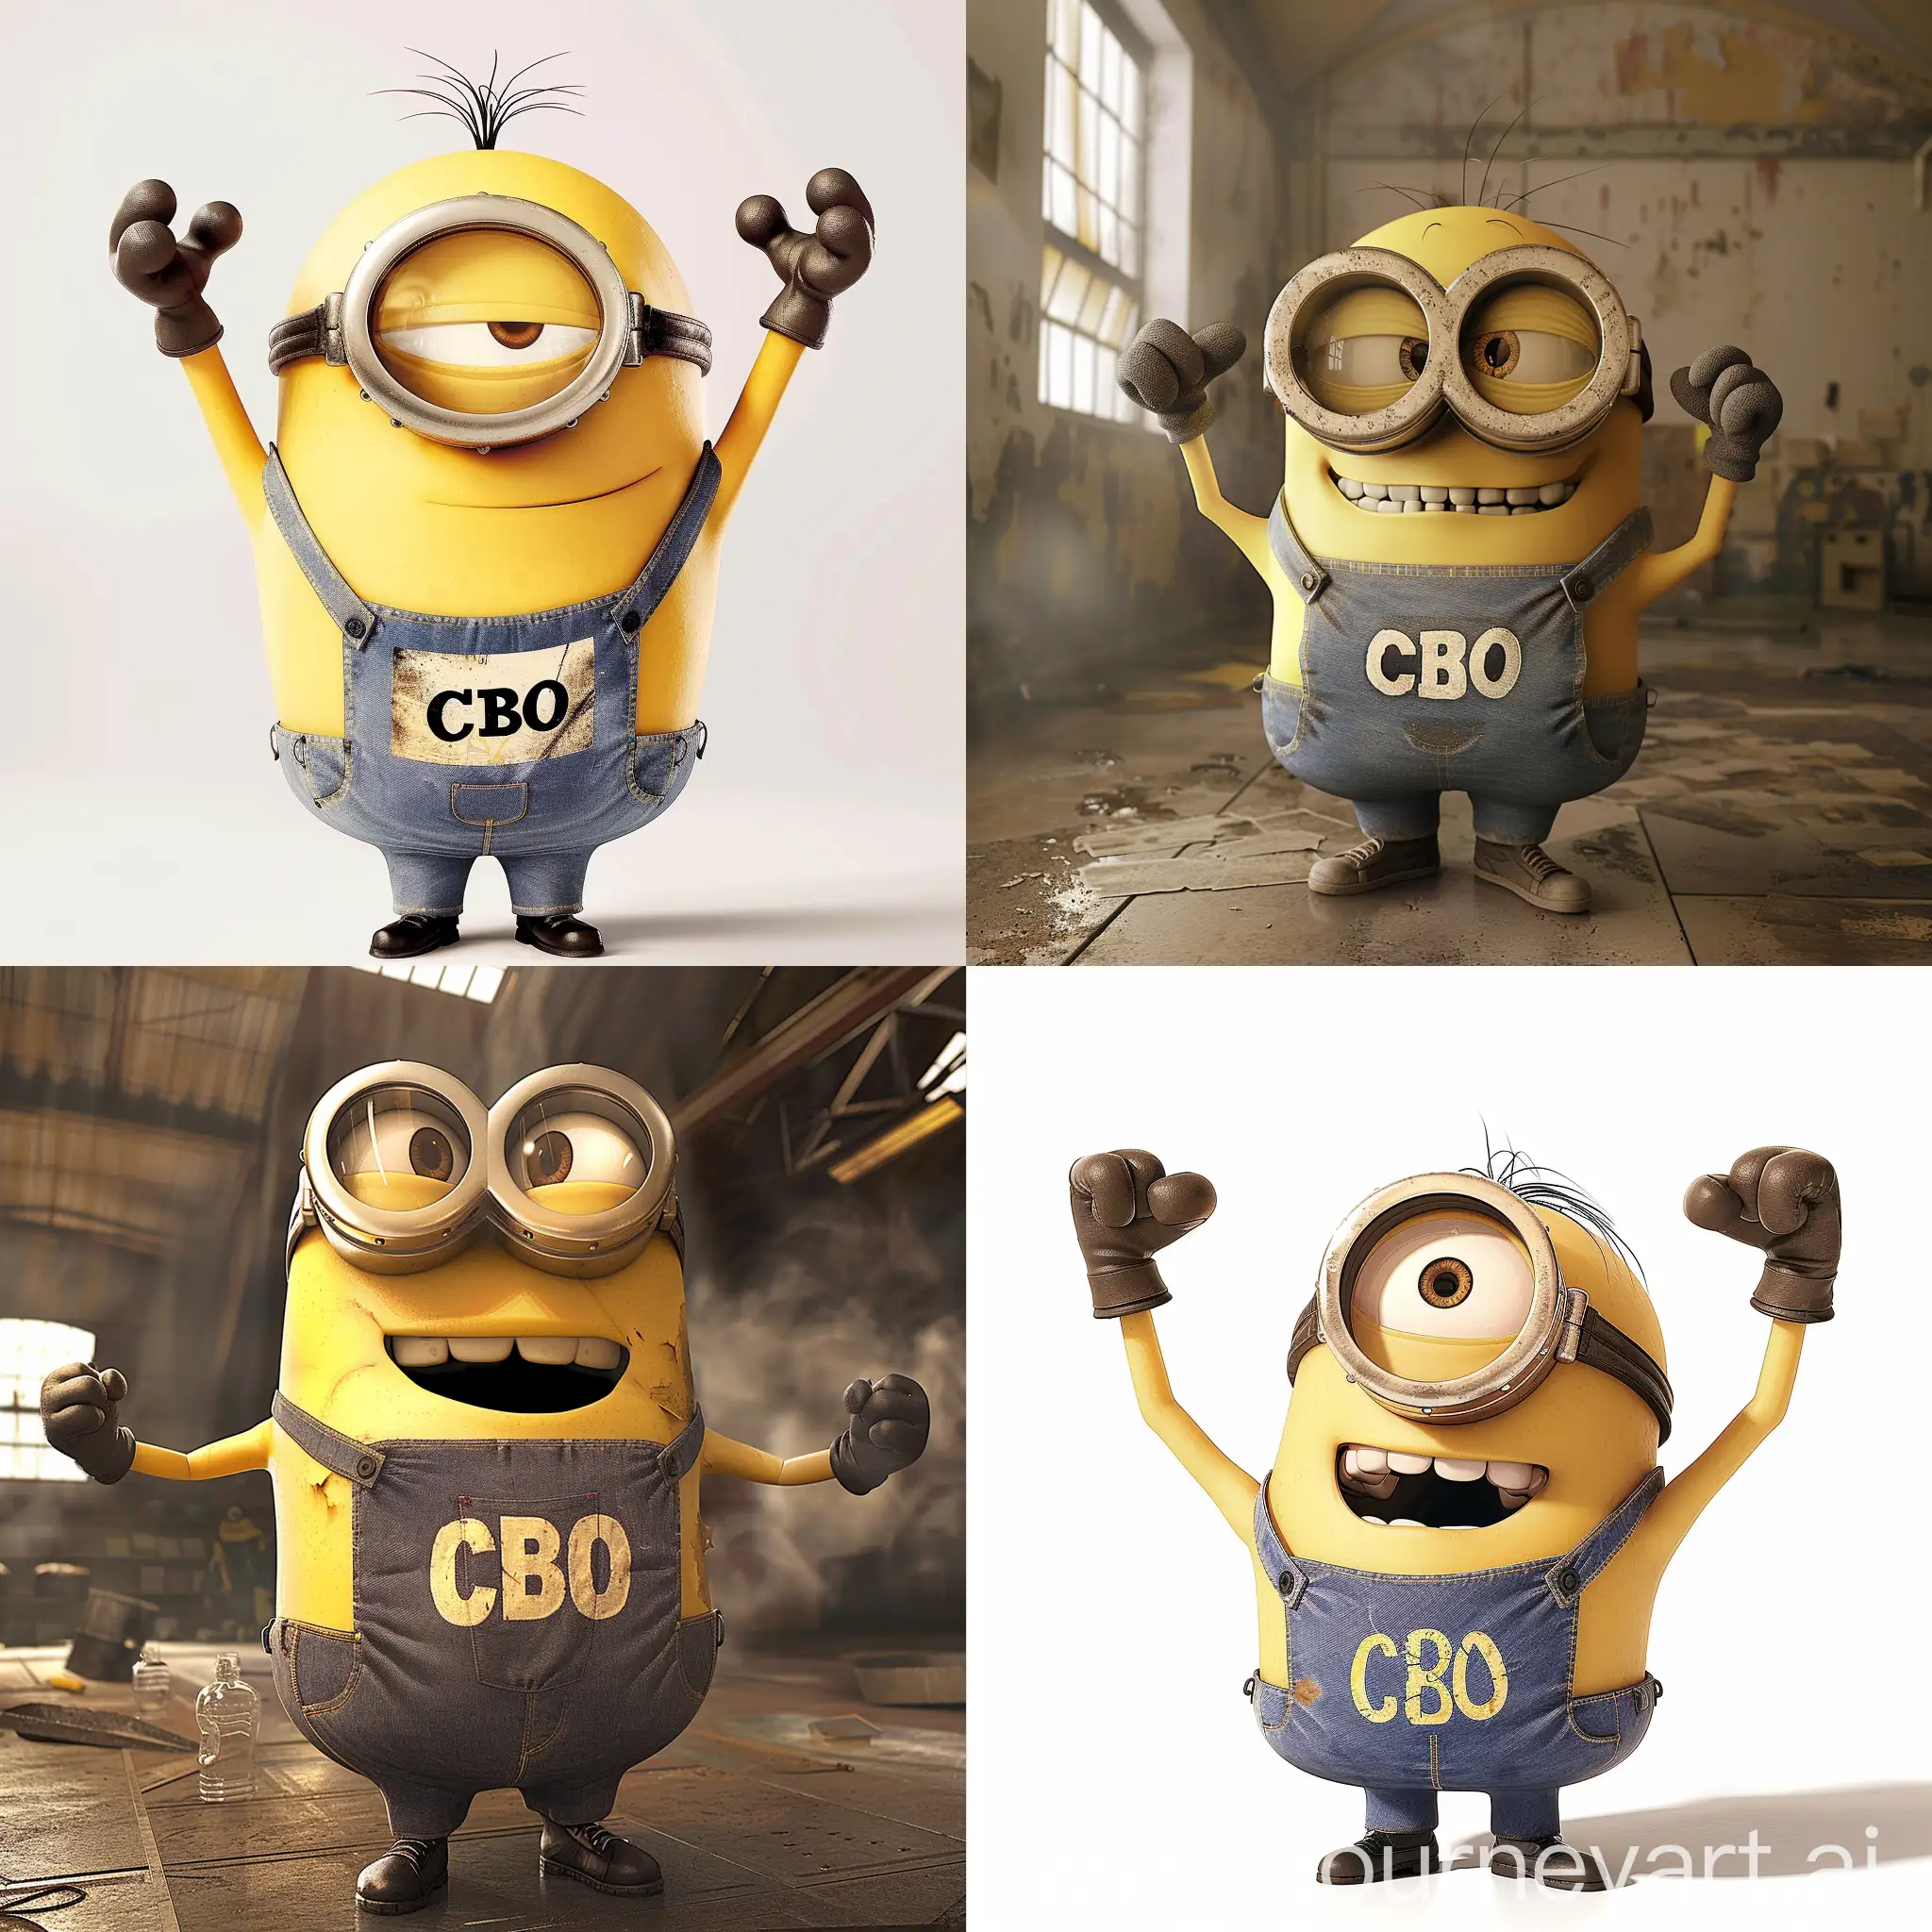 A huge pumped-up minion in a T-shirt with the inscription CBO